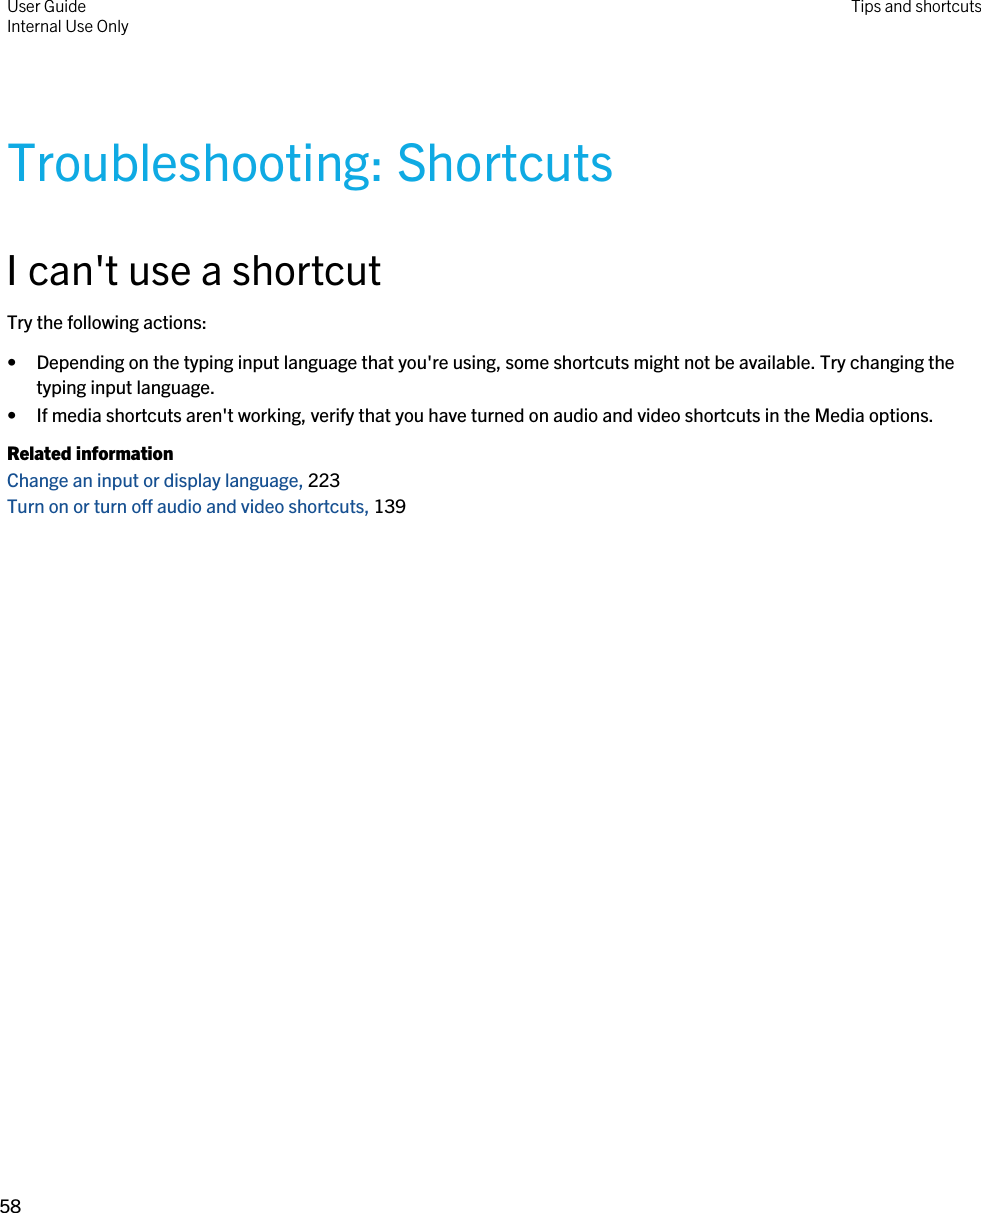 Troubleshooting: ShortcutsI can&apos;t use a shortcutTry the following actions:• Depending on the typing input language that you&apos;re using, some shortcuts might not be available. Try changing the typing input language.• If media shortcuts aren&apos;t working, verify that you have turned on audio and video shortcuts in the Media options.Related informationChange an input or display language, 223Turn on or turn off audio and video shortcuts, 139User GuideInternal Use Only Tips and shortcuts58 